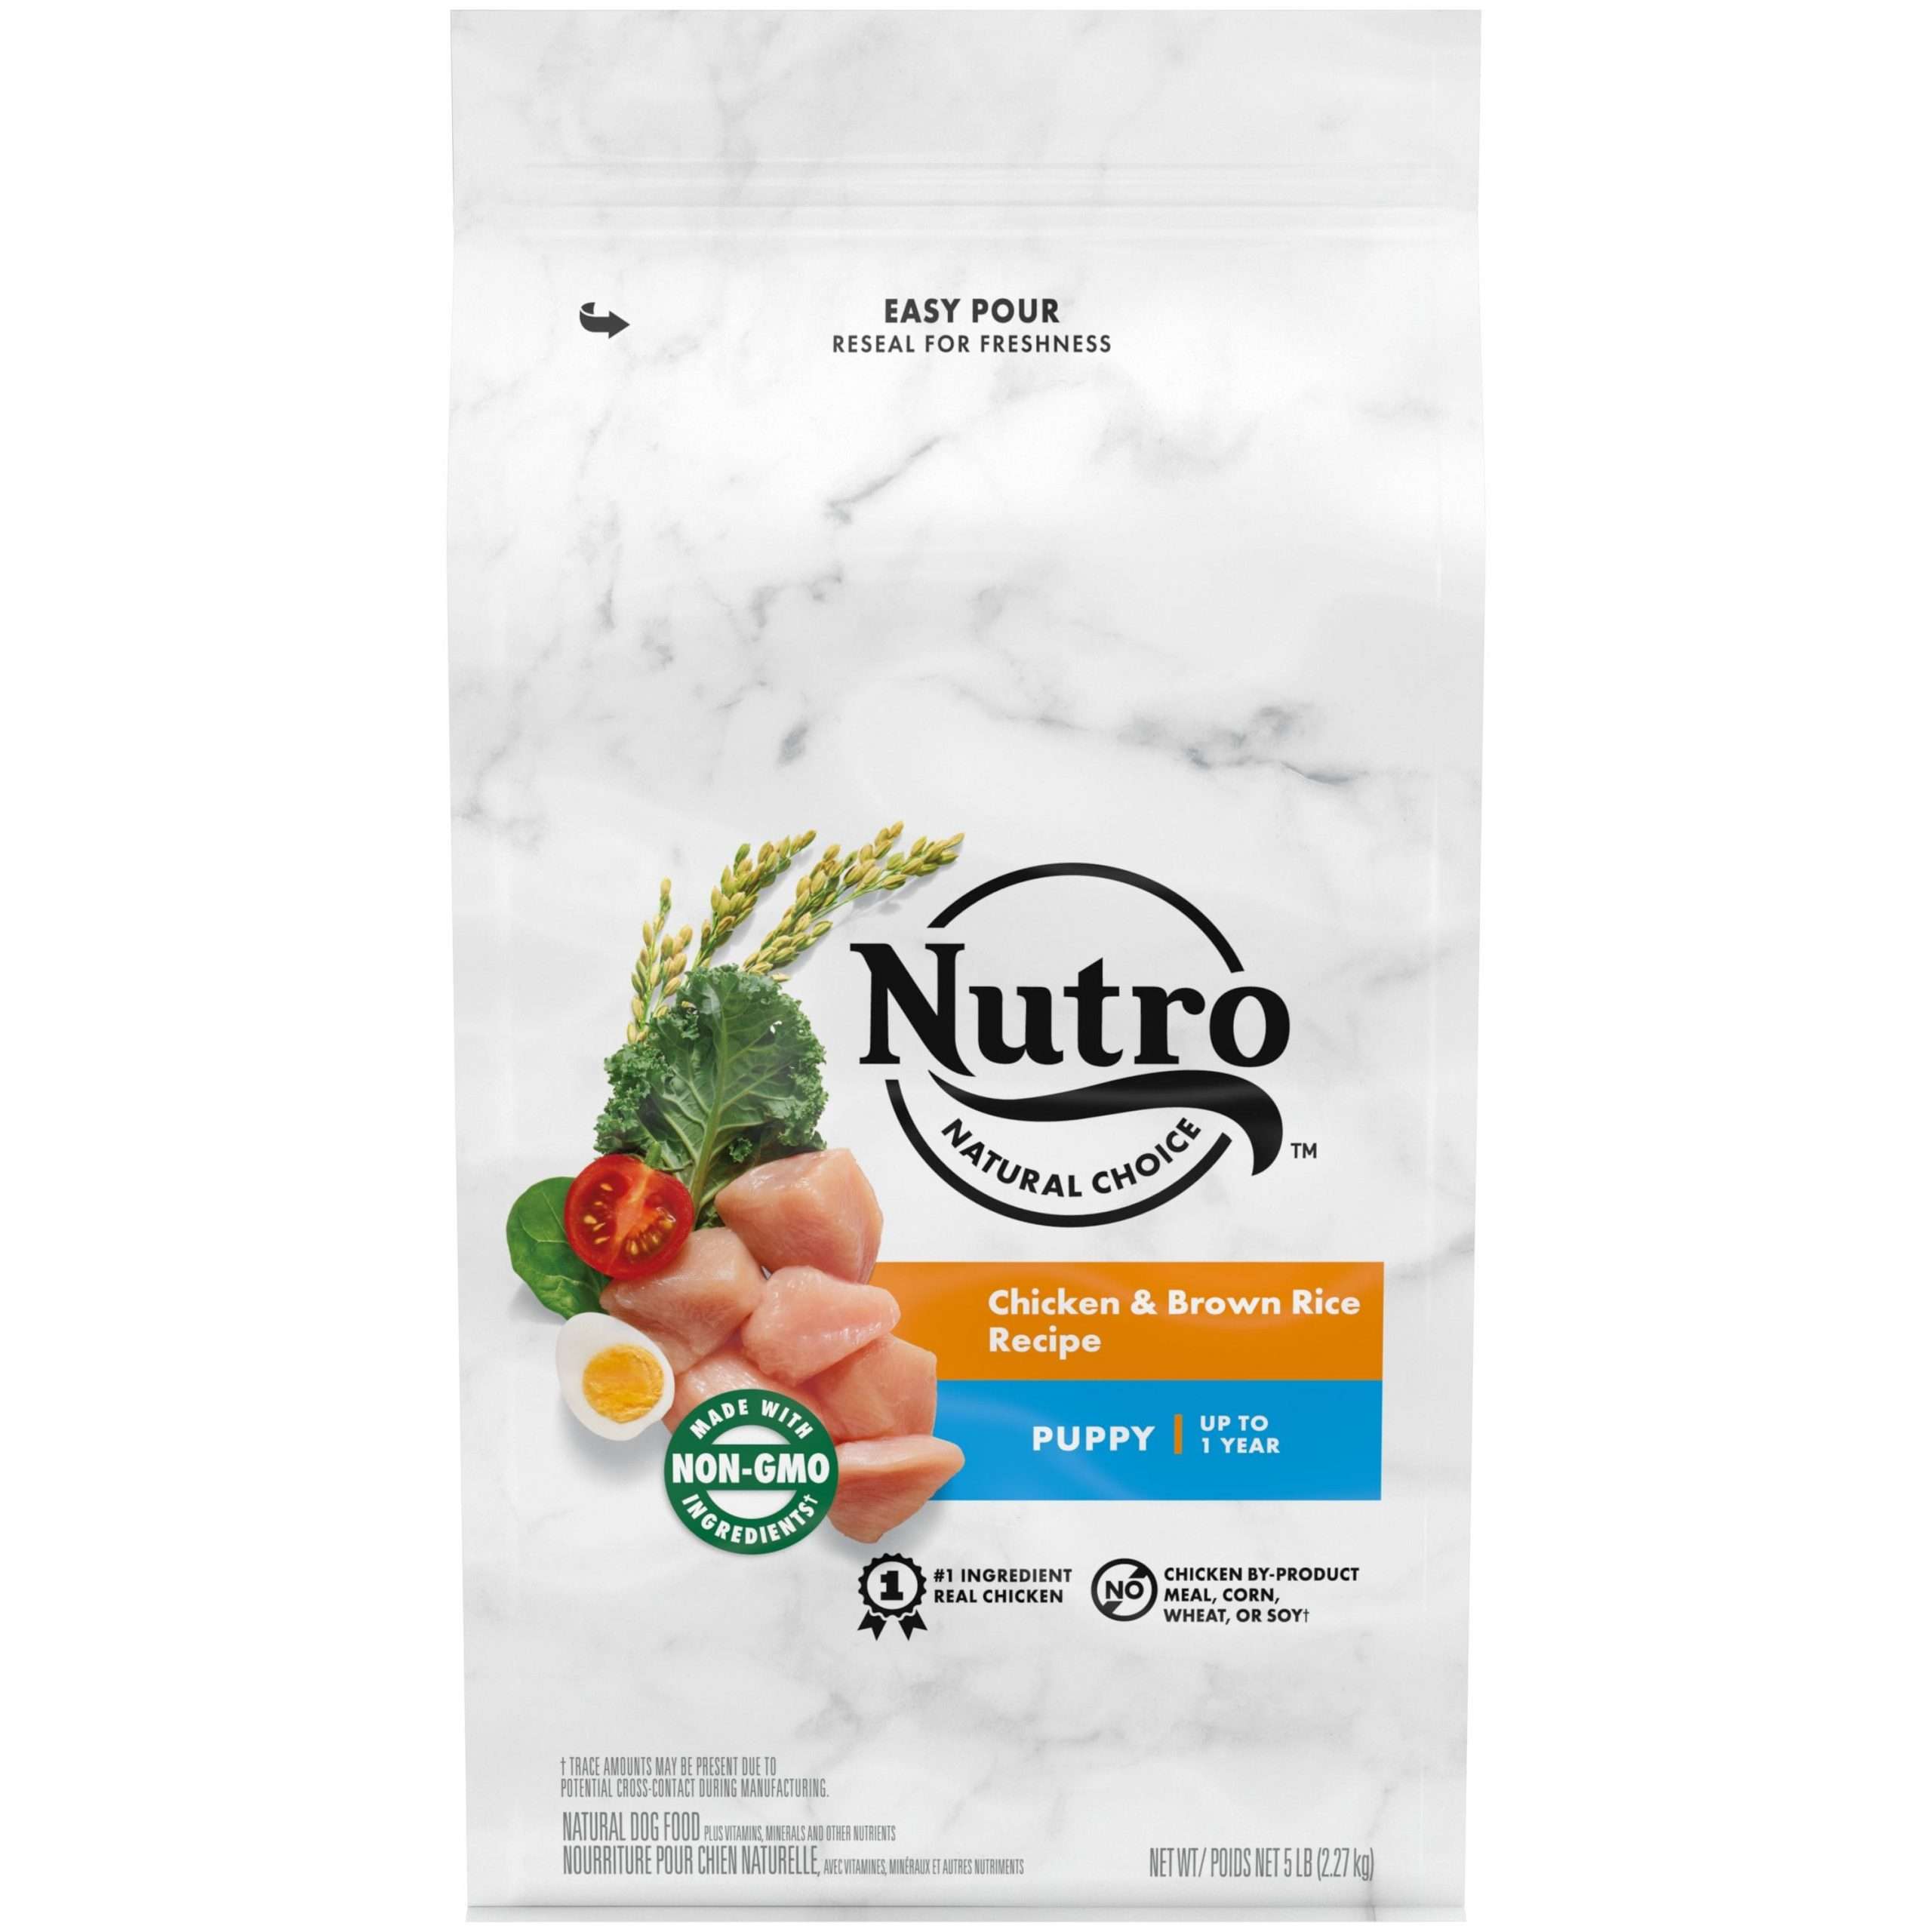 NUTRO NATURAL CHOICE Puppy Dry Dog Food, Chicken